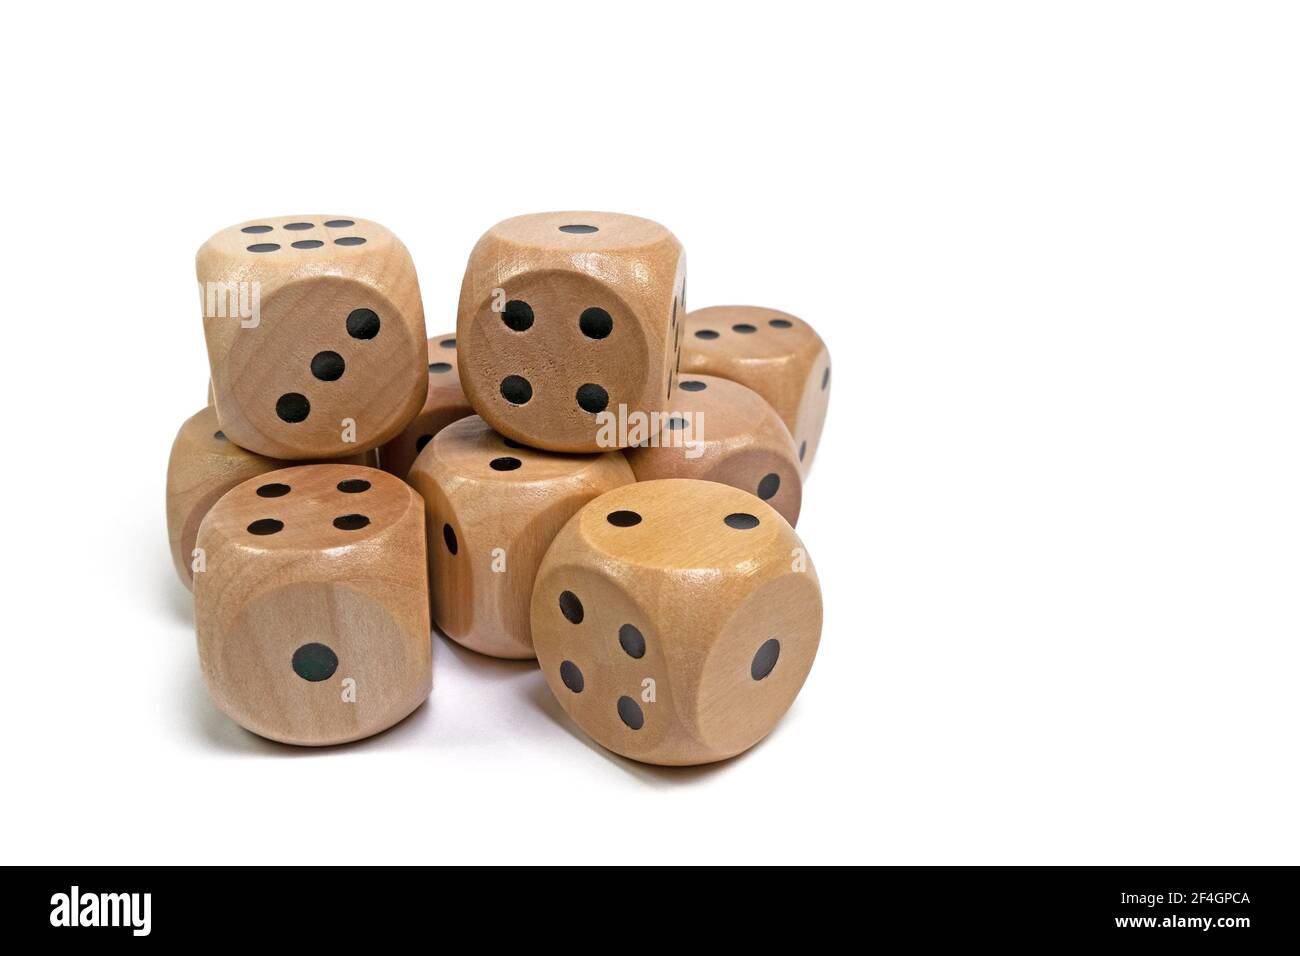 Wooden game dice against a white background Stock Photo